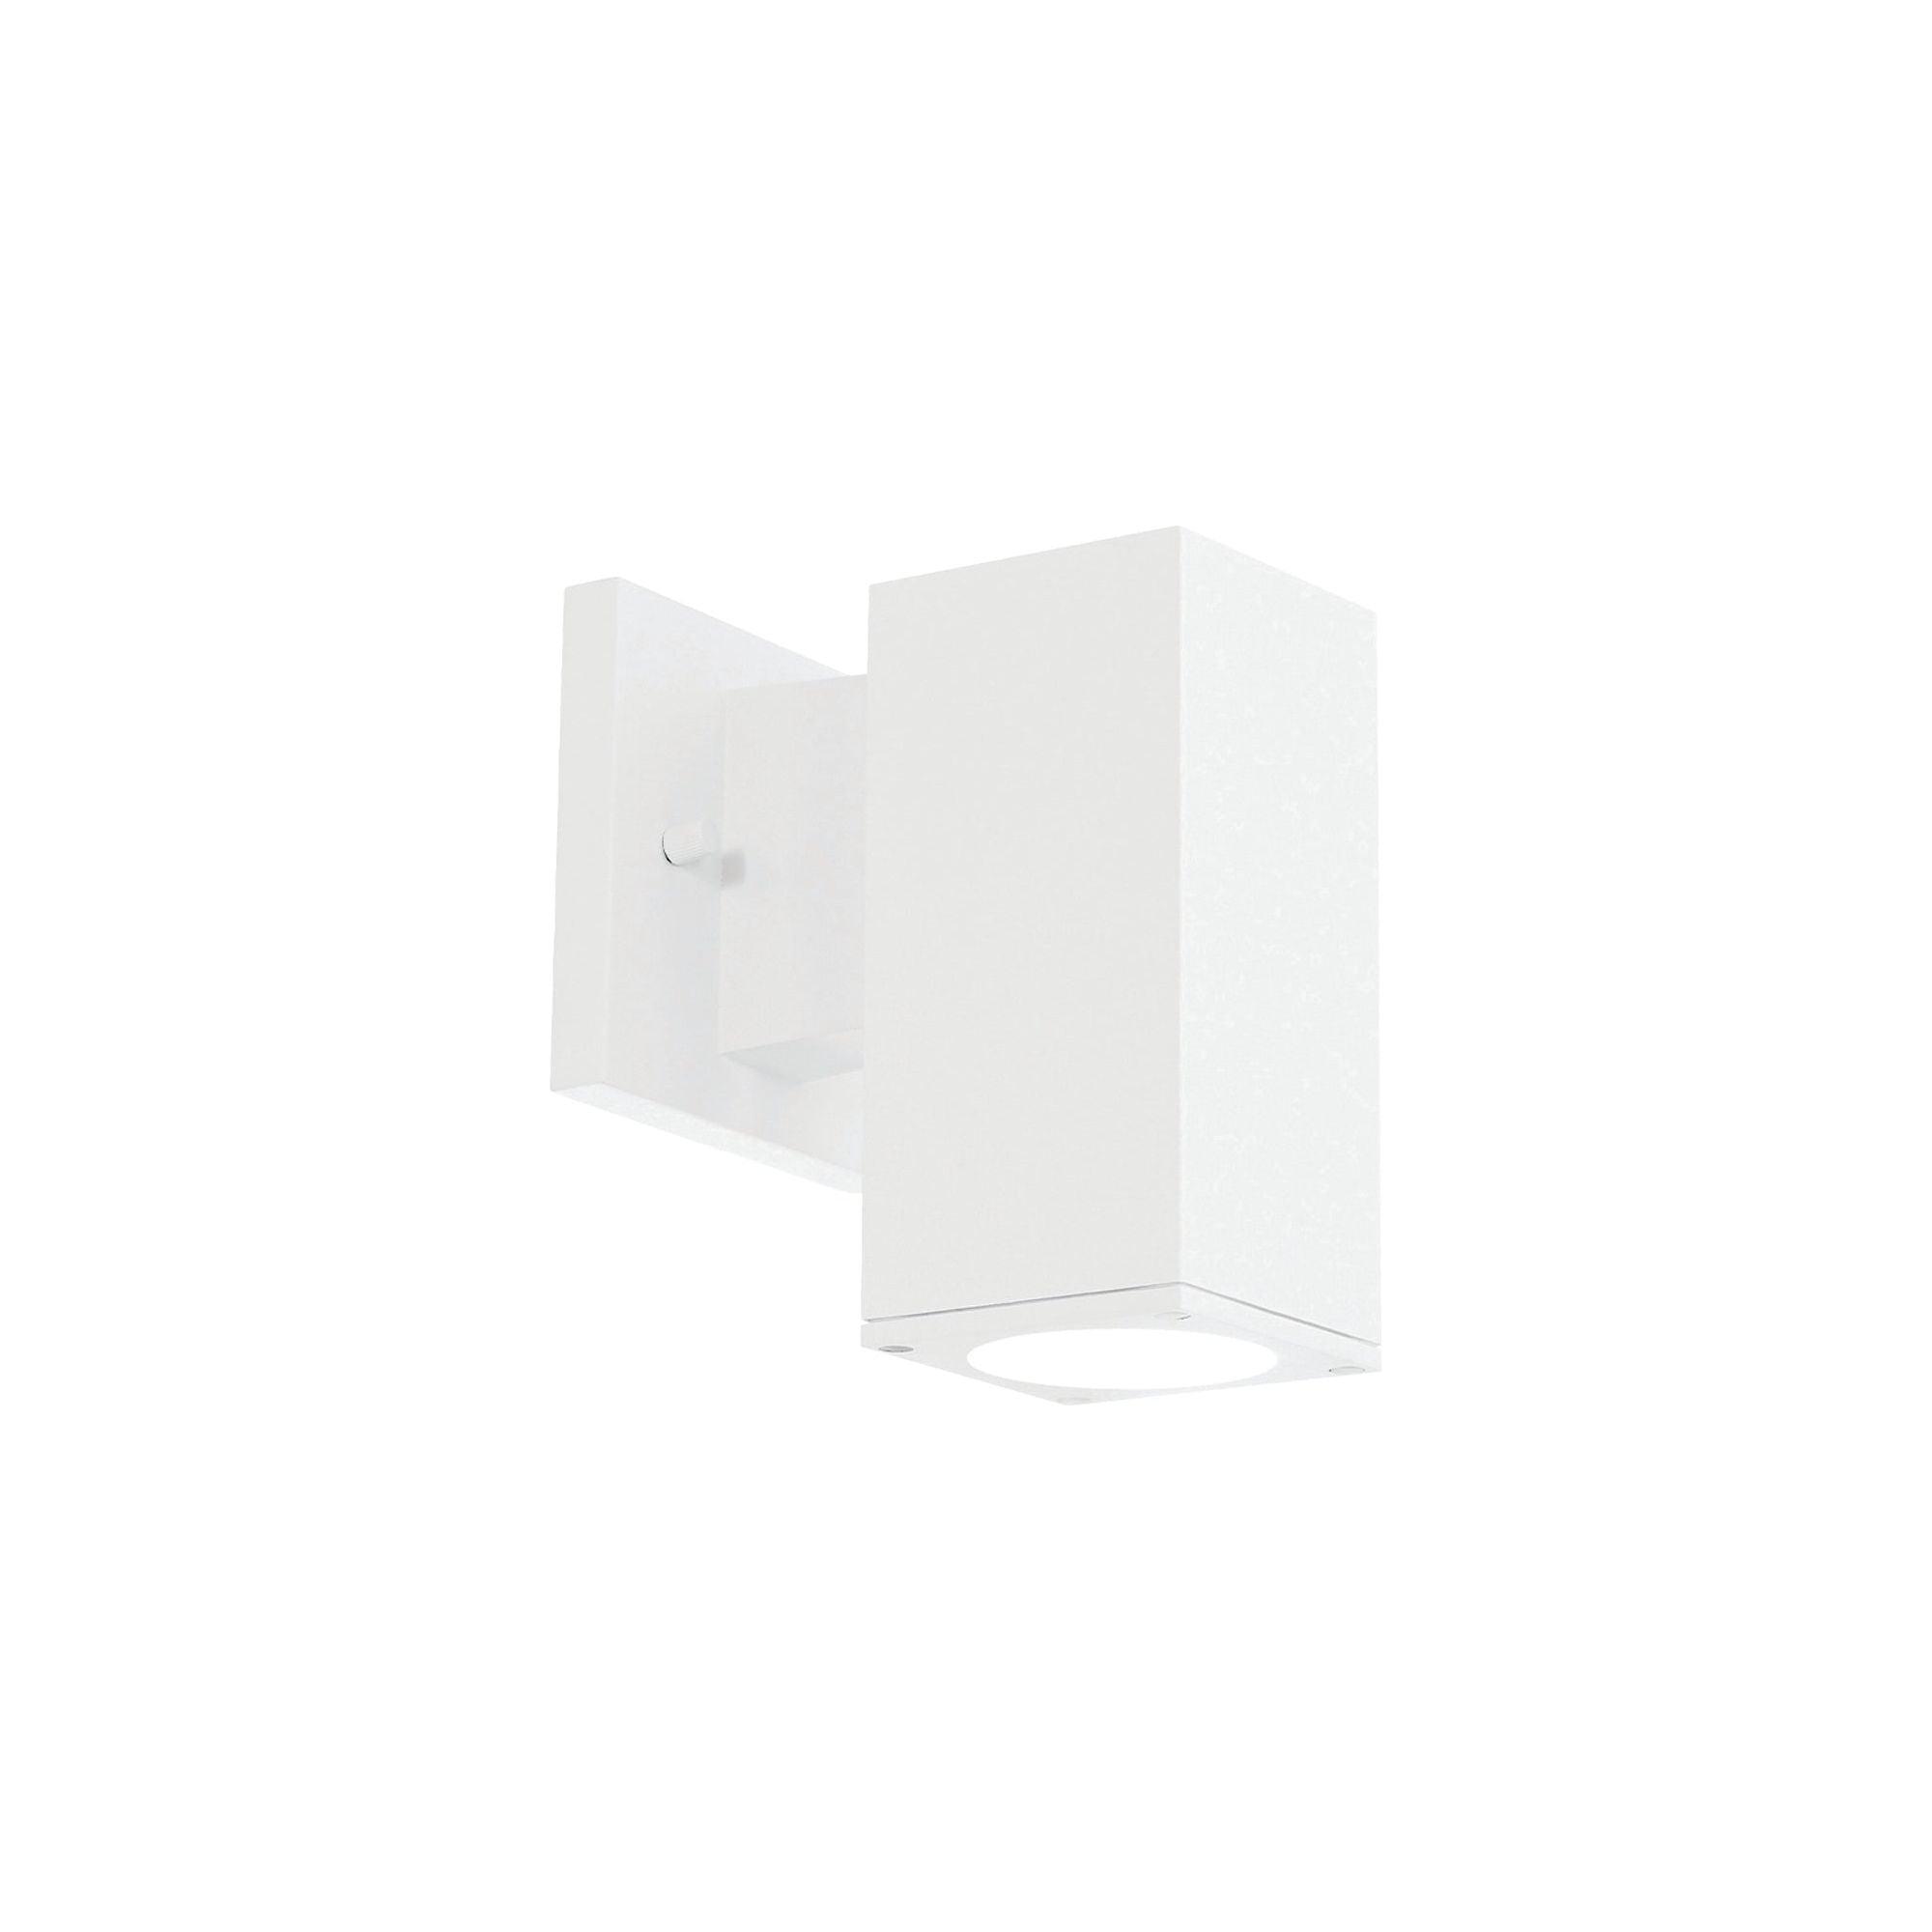 WAC Lighting - Cubix LED Single Up or Down Indoor/Outdoor Wall Light - Lights Canada